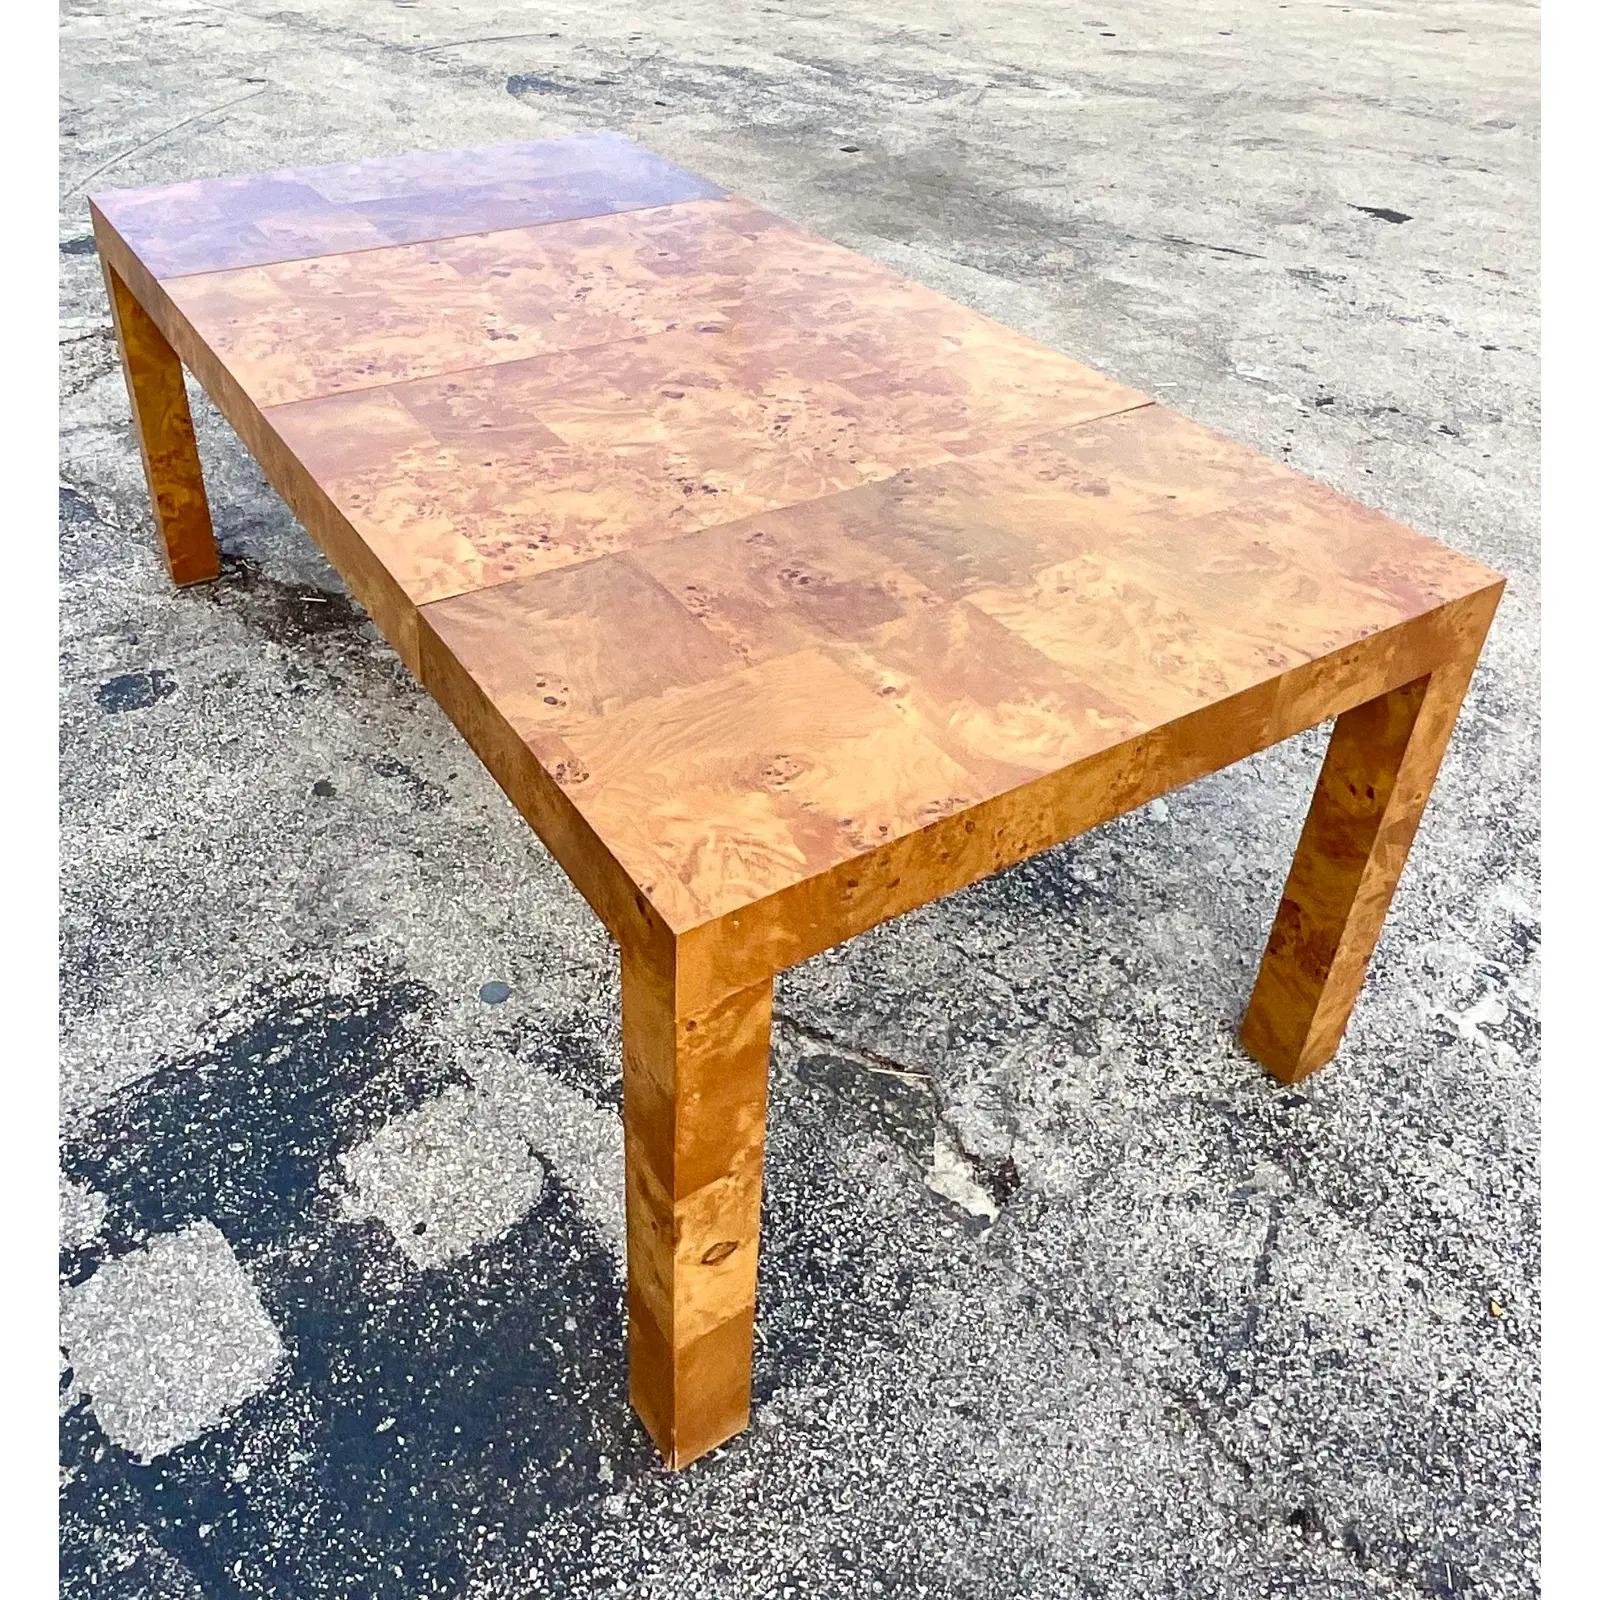 The most amazing vintage MCM dining table. Beautiful patchwork Burl wood in a chic parsons shape. Two leaves for maximum seating at 79 inches! Moves daily from game table to dining table. You decide! Acquired from a Palm Beach estate.

Leaf